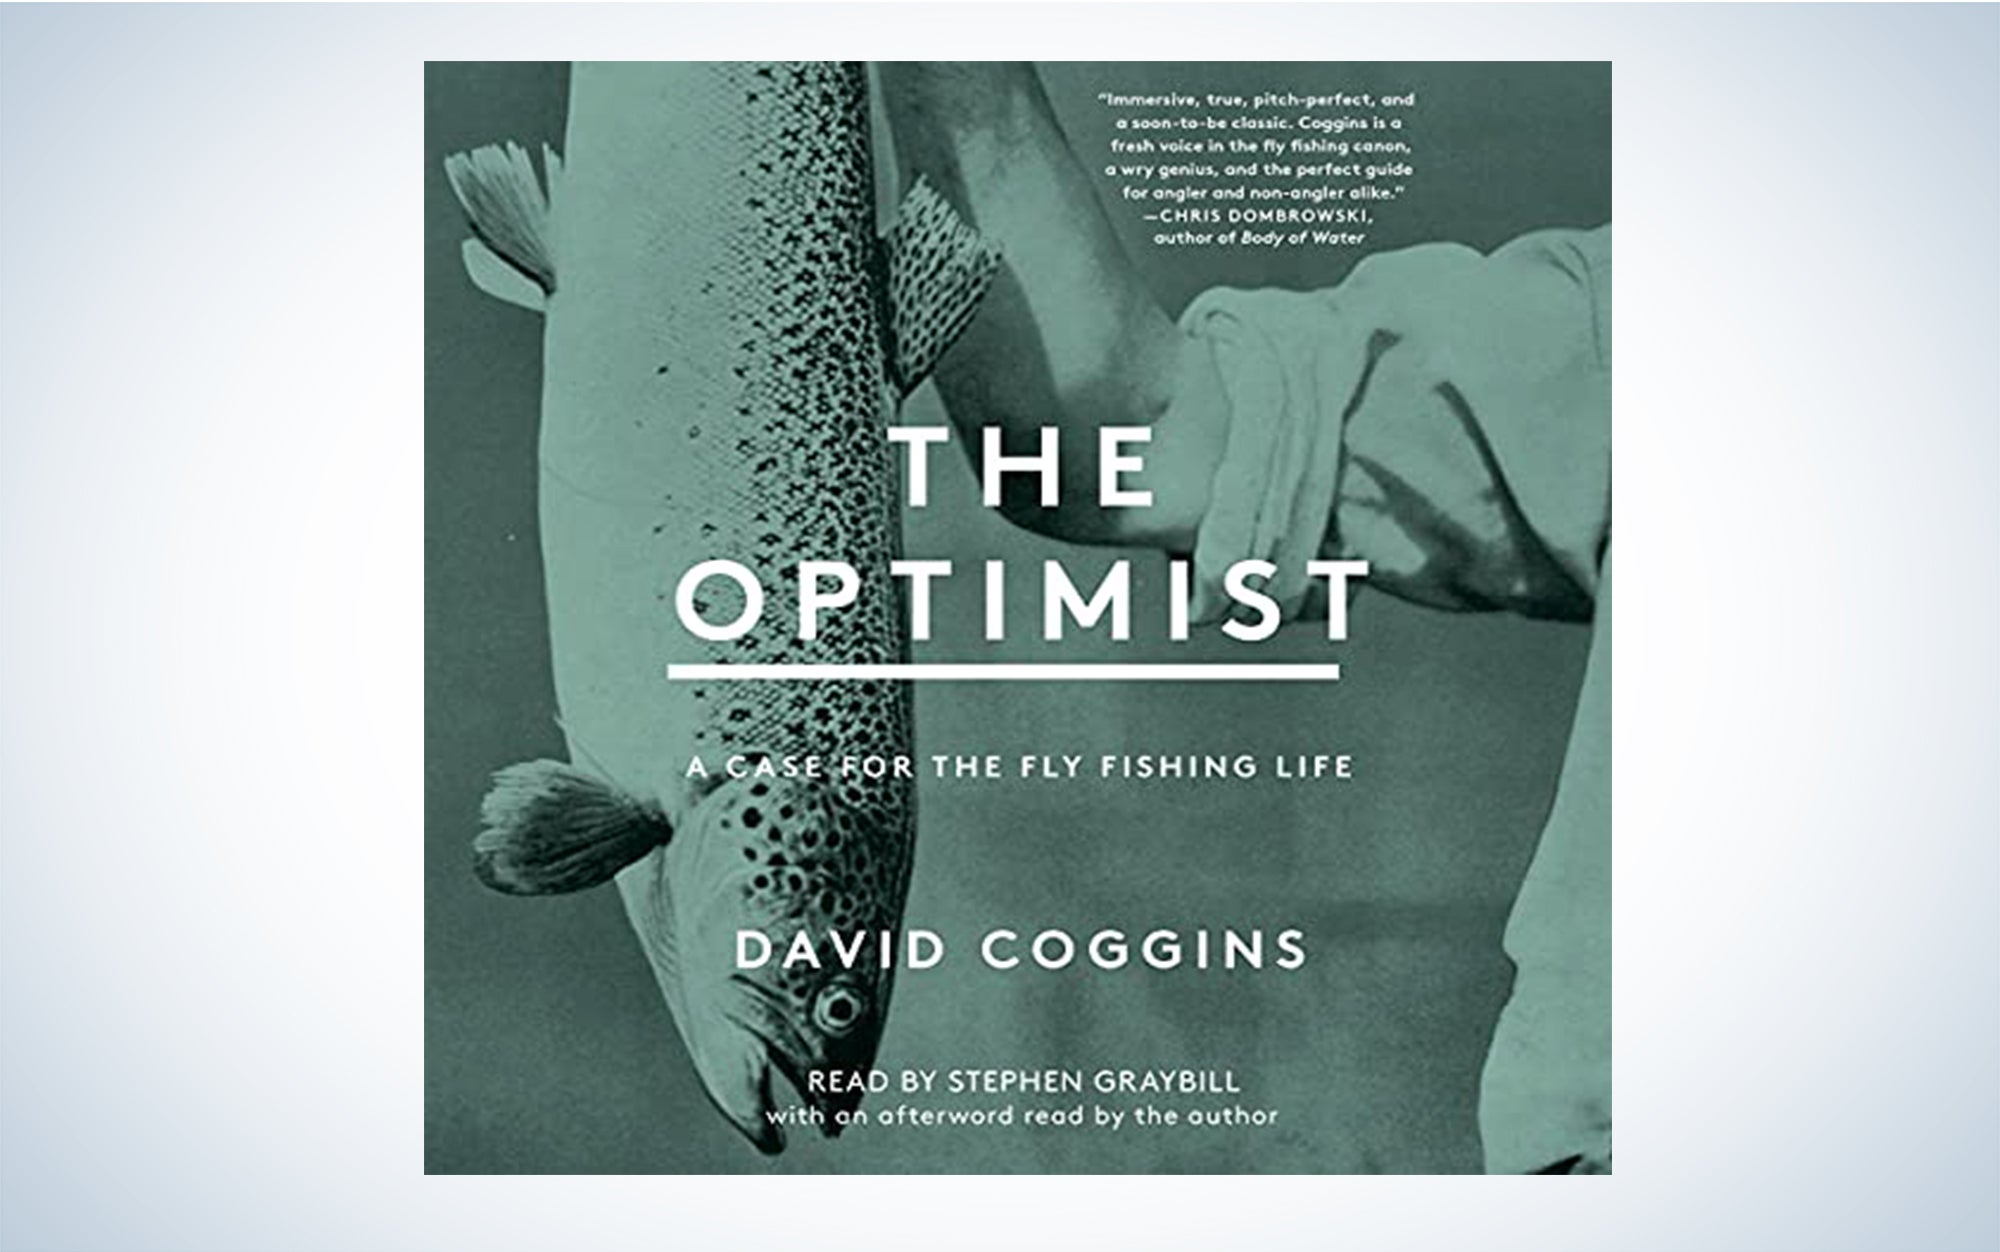 We read The Optimist: A Case for the Fly Fishing Life.